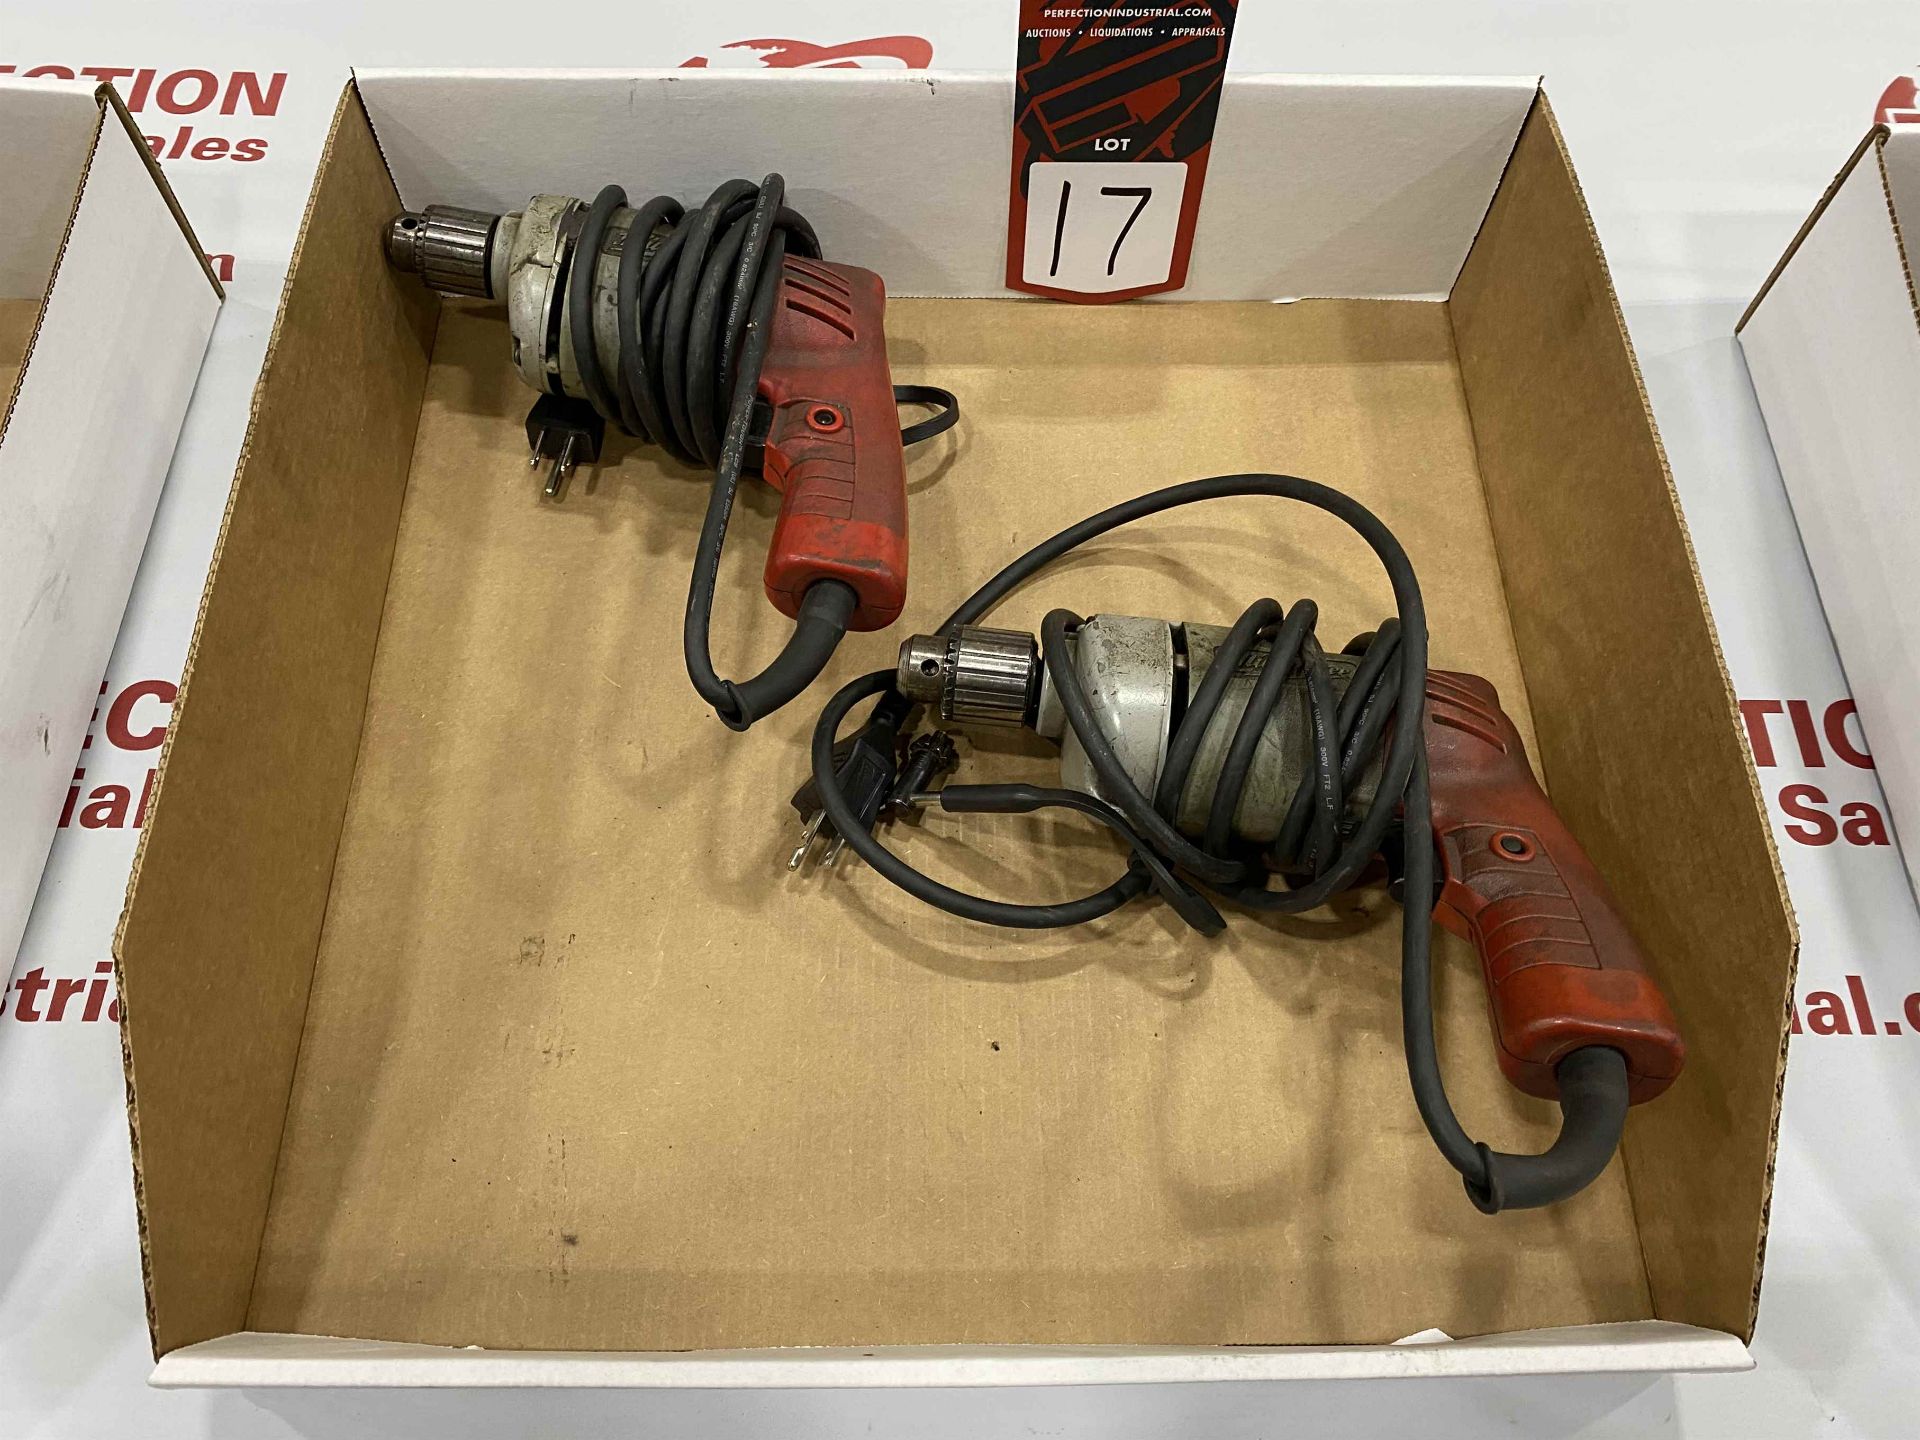 Lot Comprising (1) MILWAUKEE 3/8 " Drill and (1) MILWAUKEE 1/4 " Drill